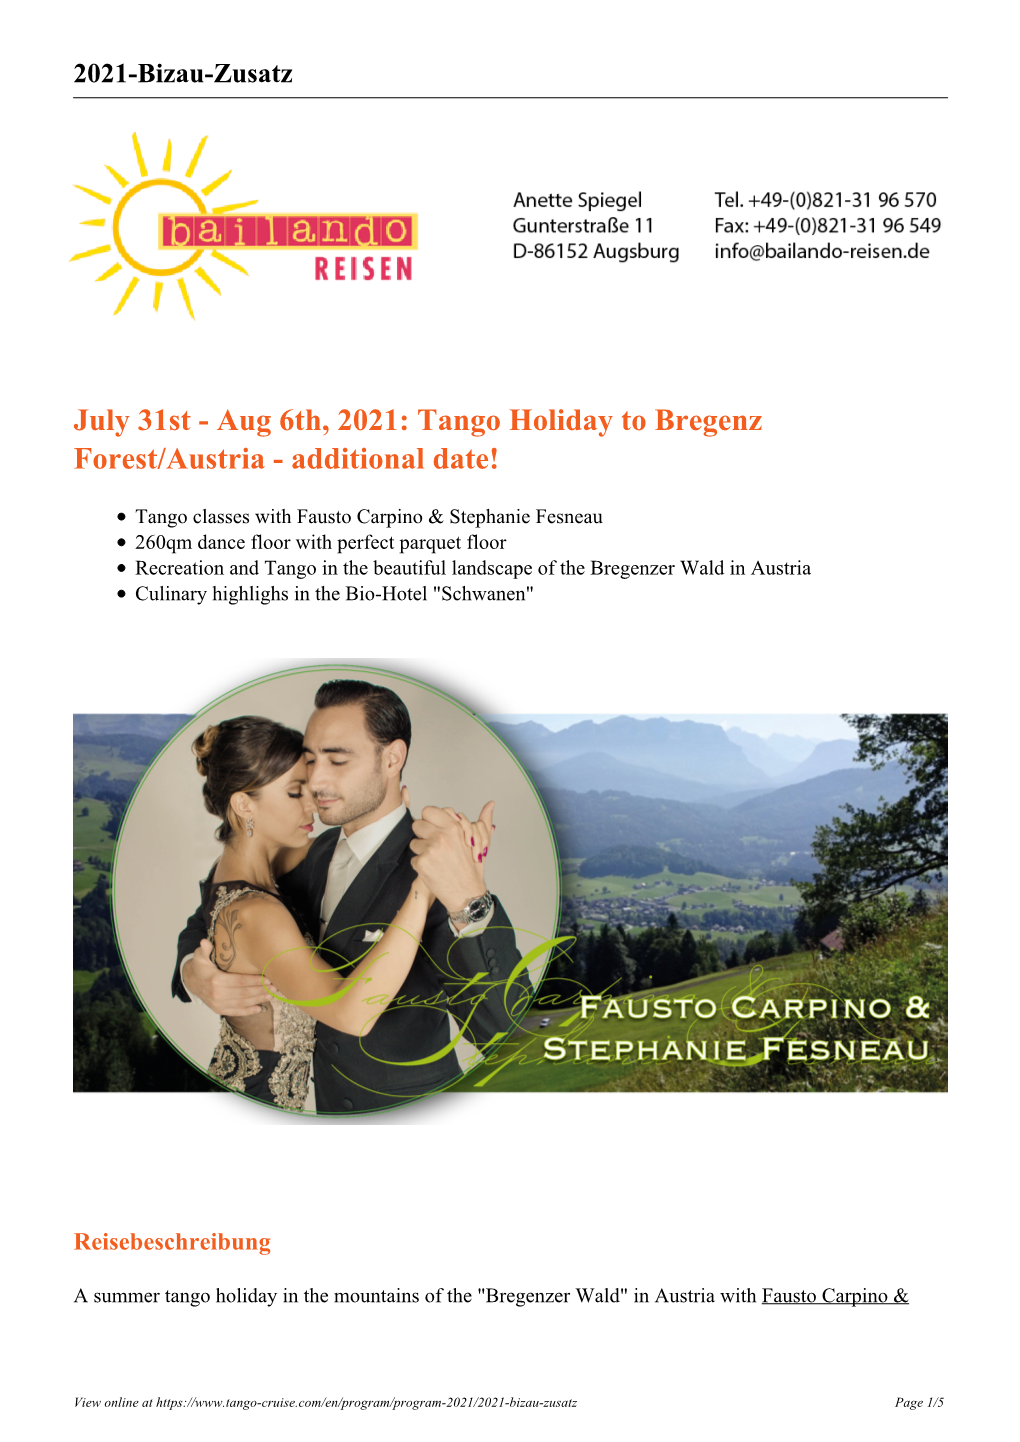 Tango Holiday to Bregenz Forest/Austria - Additional Date!